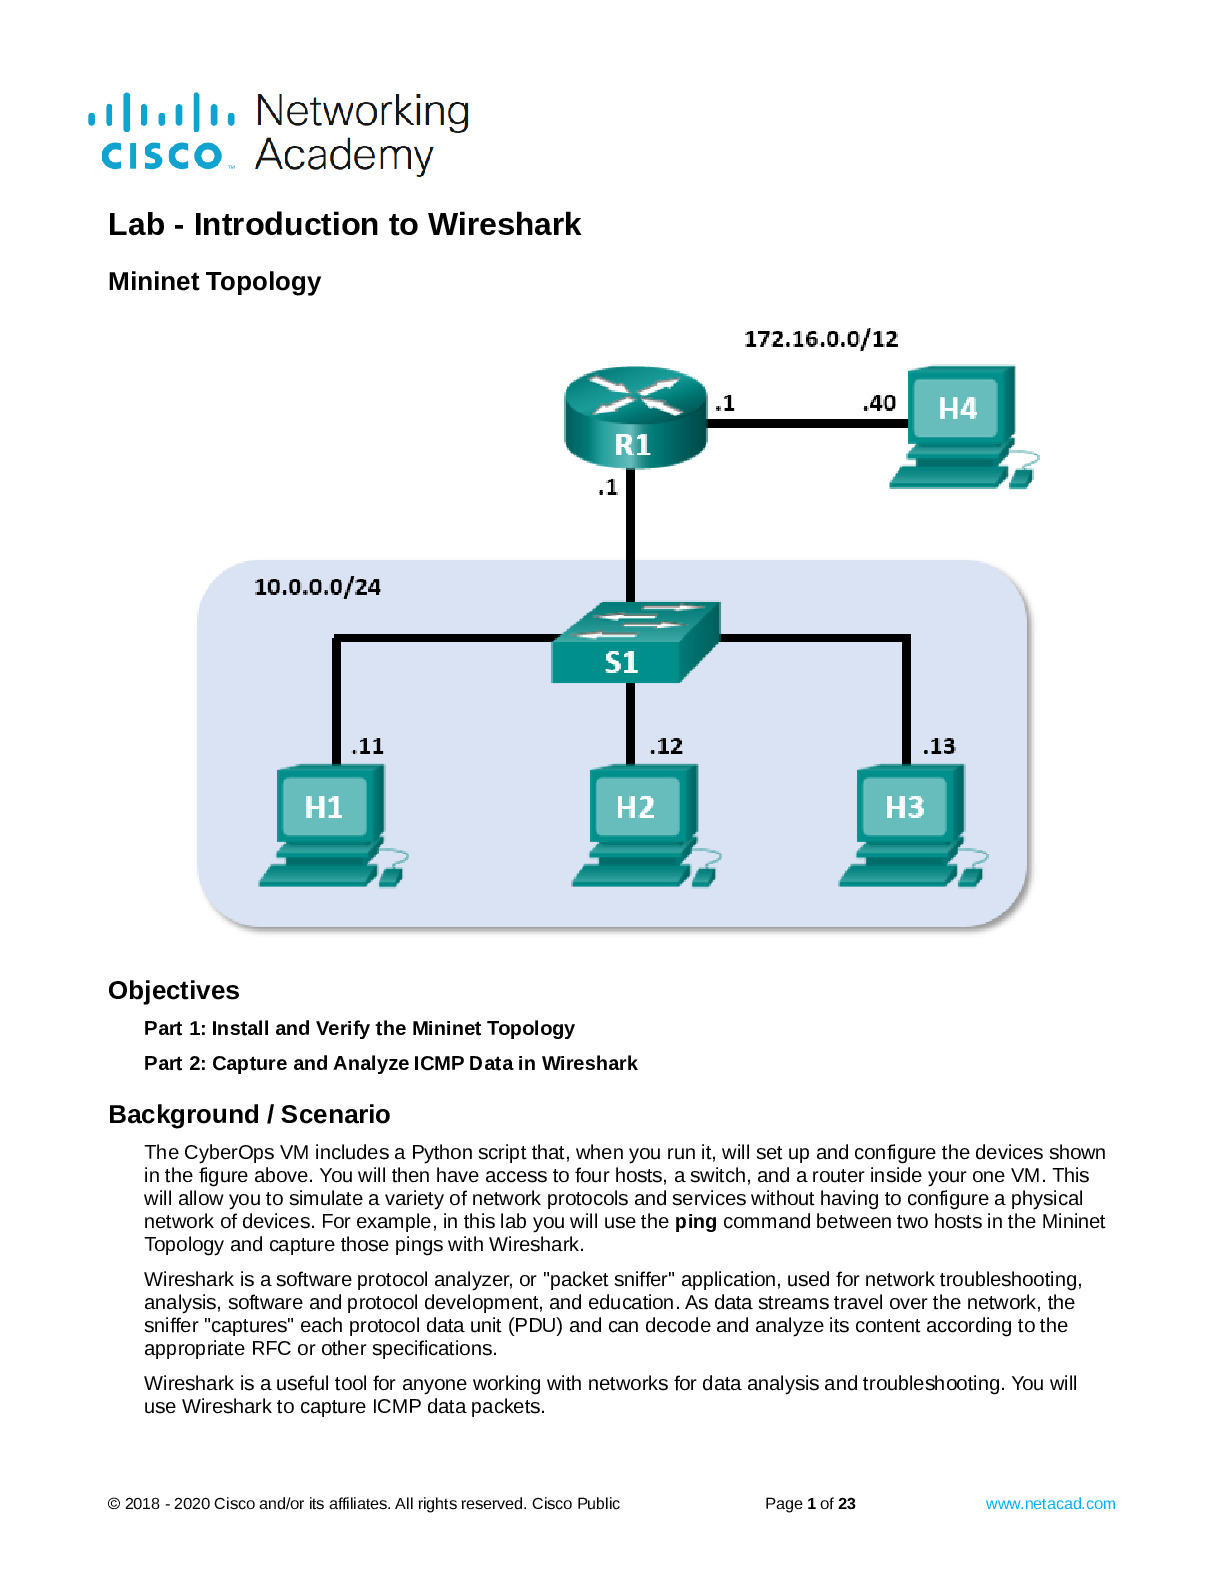 5.3.7_Lab___Introduction_to_Wireshark.docx